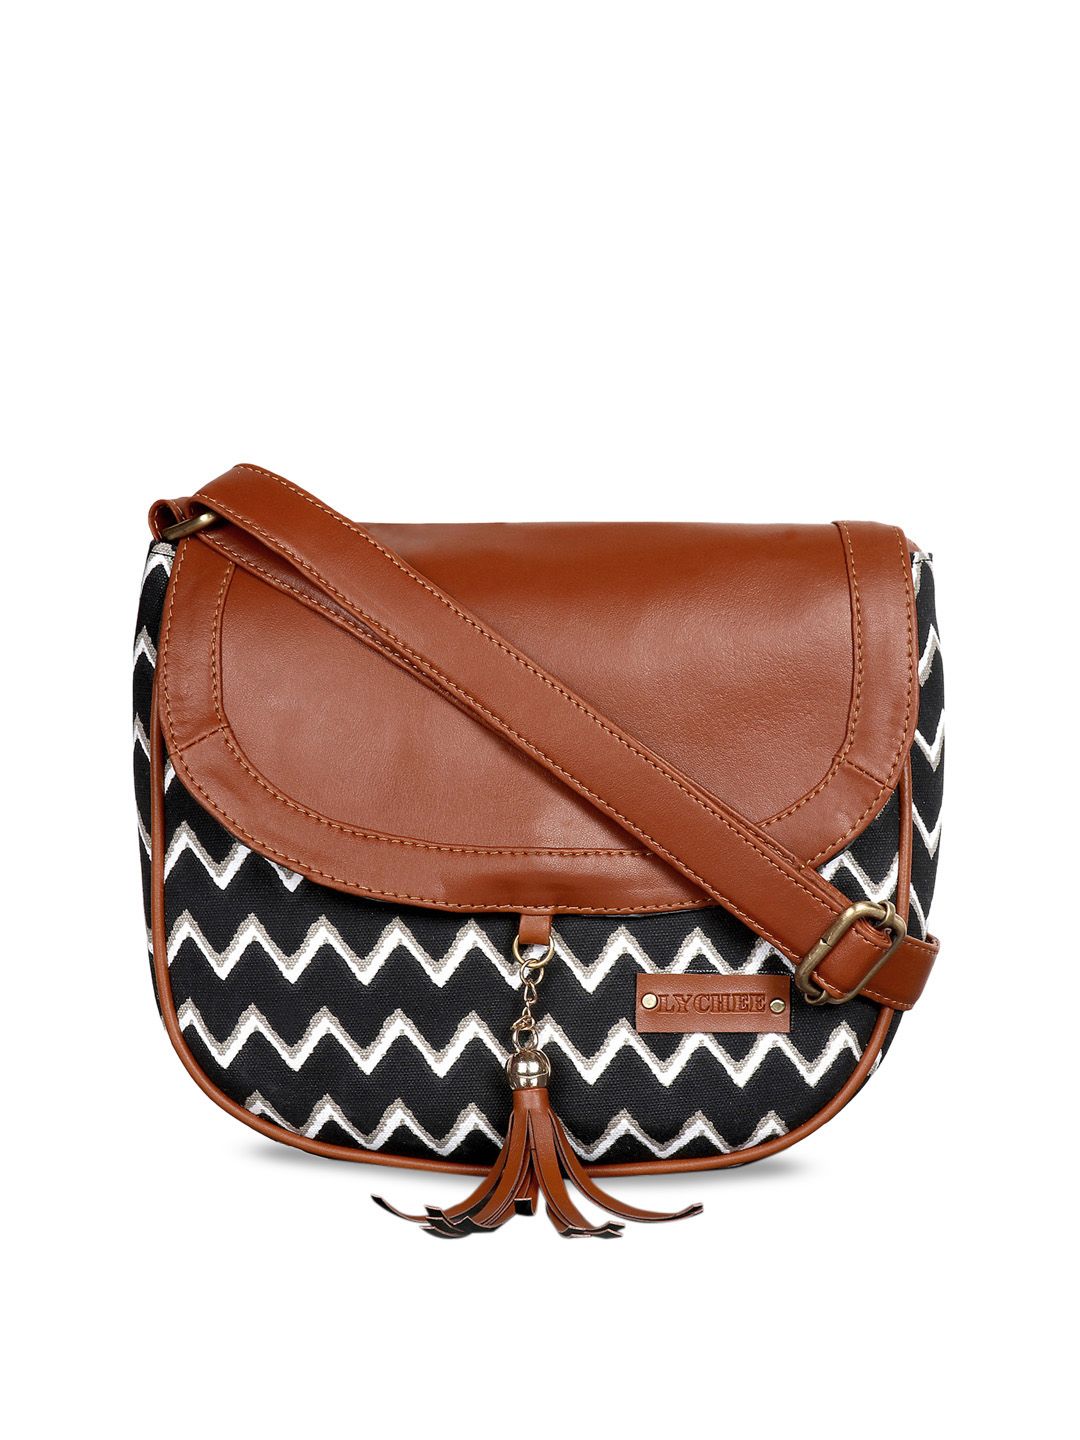 Lychee bags Multicoloured Striped Sling Bag Price in India